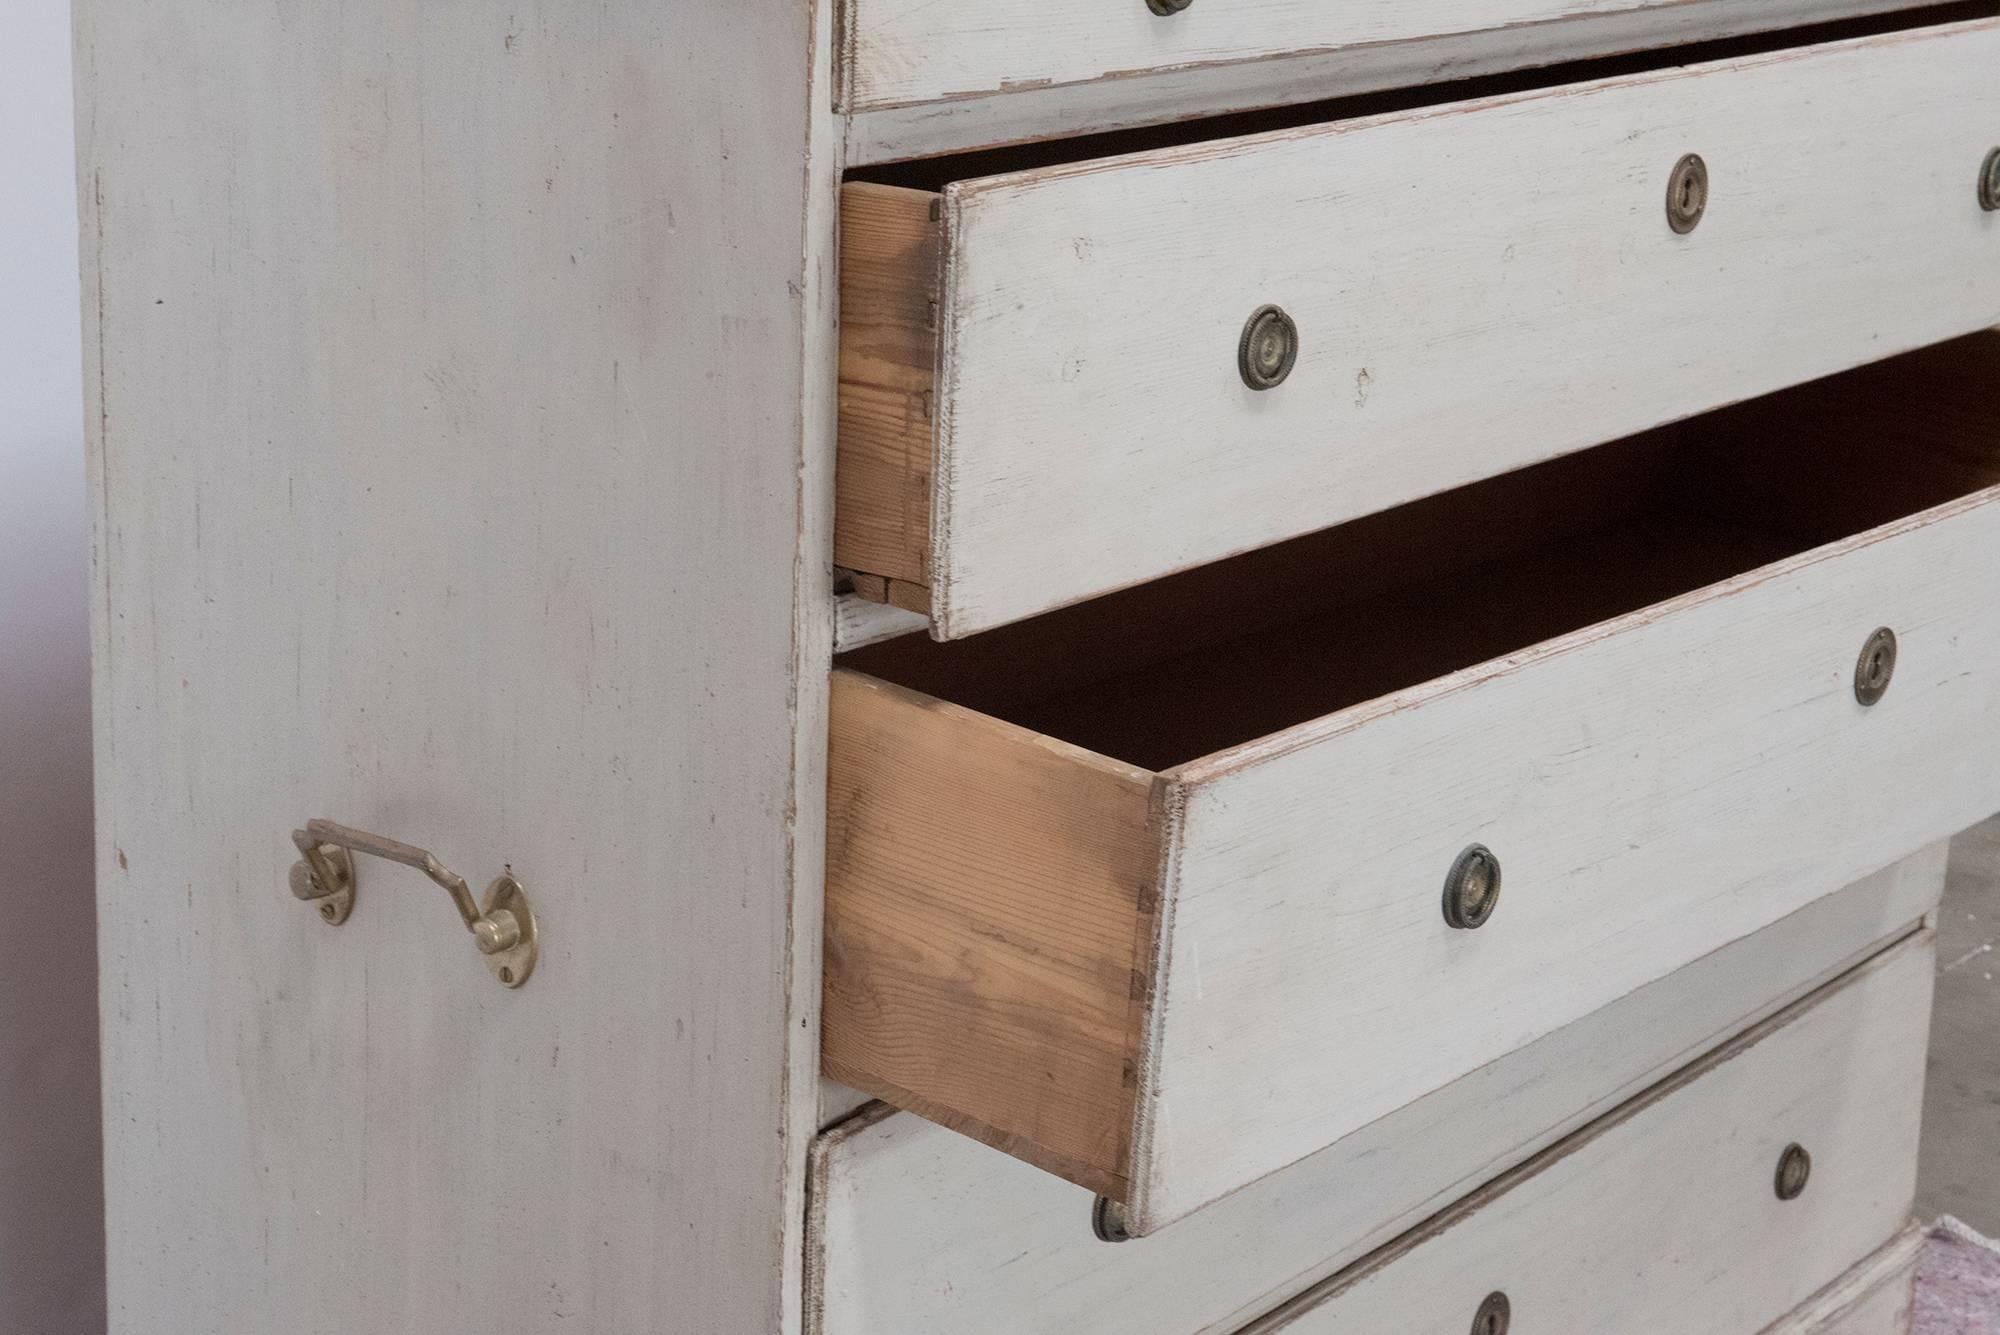 A wonderful Gustavian chest of drawers with five drawers all in working condition. Side has brass hardware handles for easy placement. High chest with scroll-work on base of legs, Swedish, circa 1880.